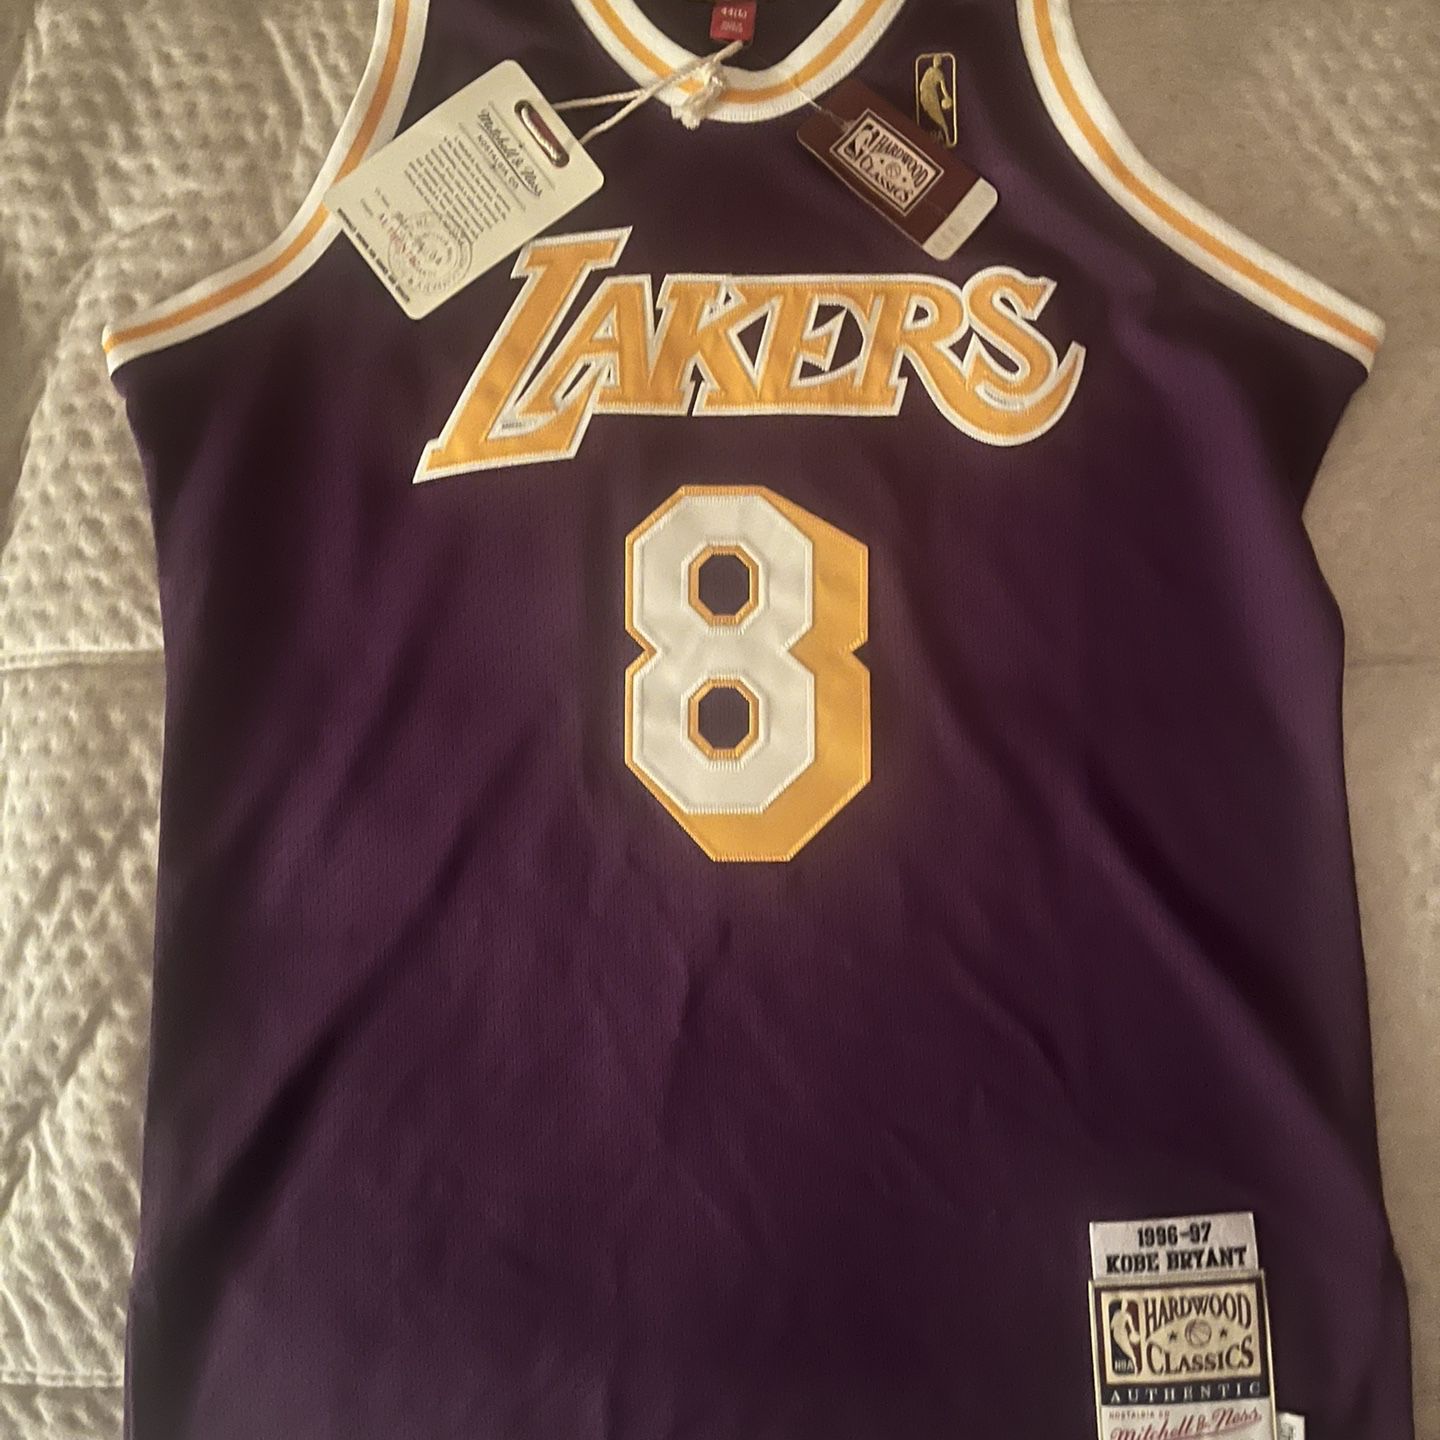 Authentic Kobe Bryant Lakers Jersey No. 8 Mitchell & Ness for Sale in  Phoenix, AZ - OfferUp